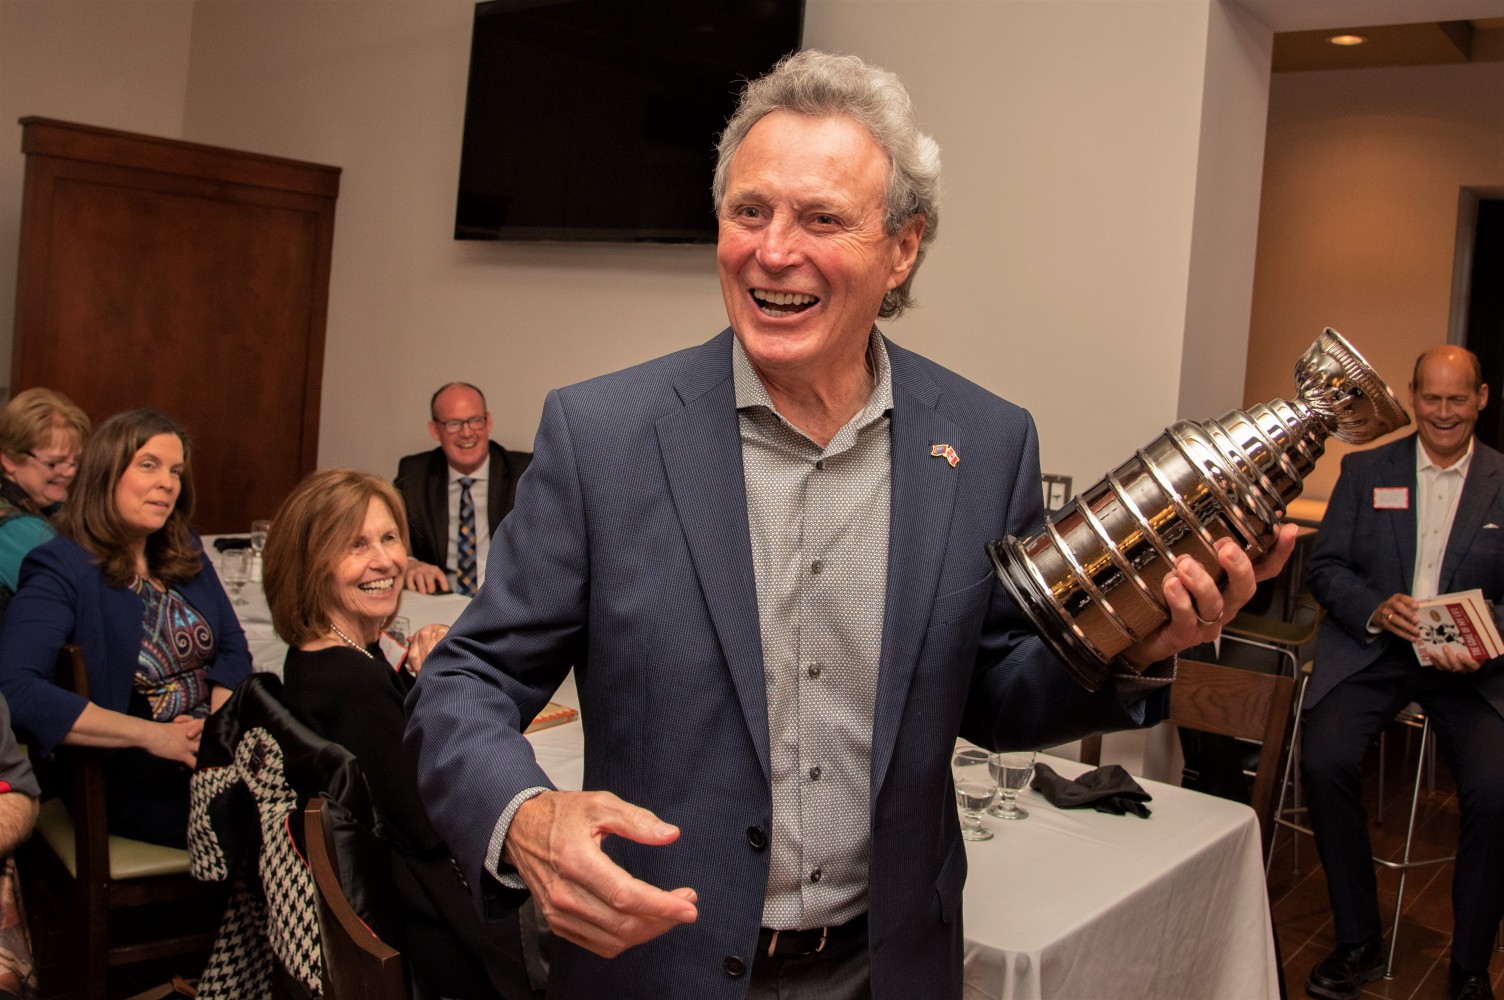 Paul Henderson doesn’t need to be in hockey’s hallowed hall – he’s thriving in God’s House